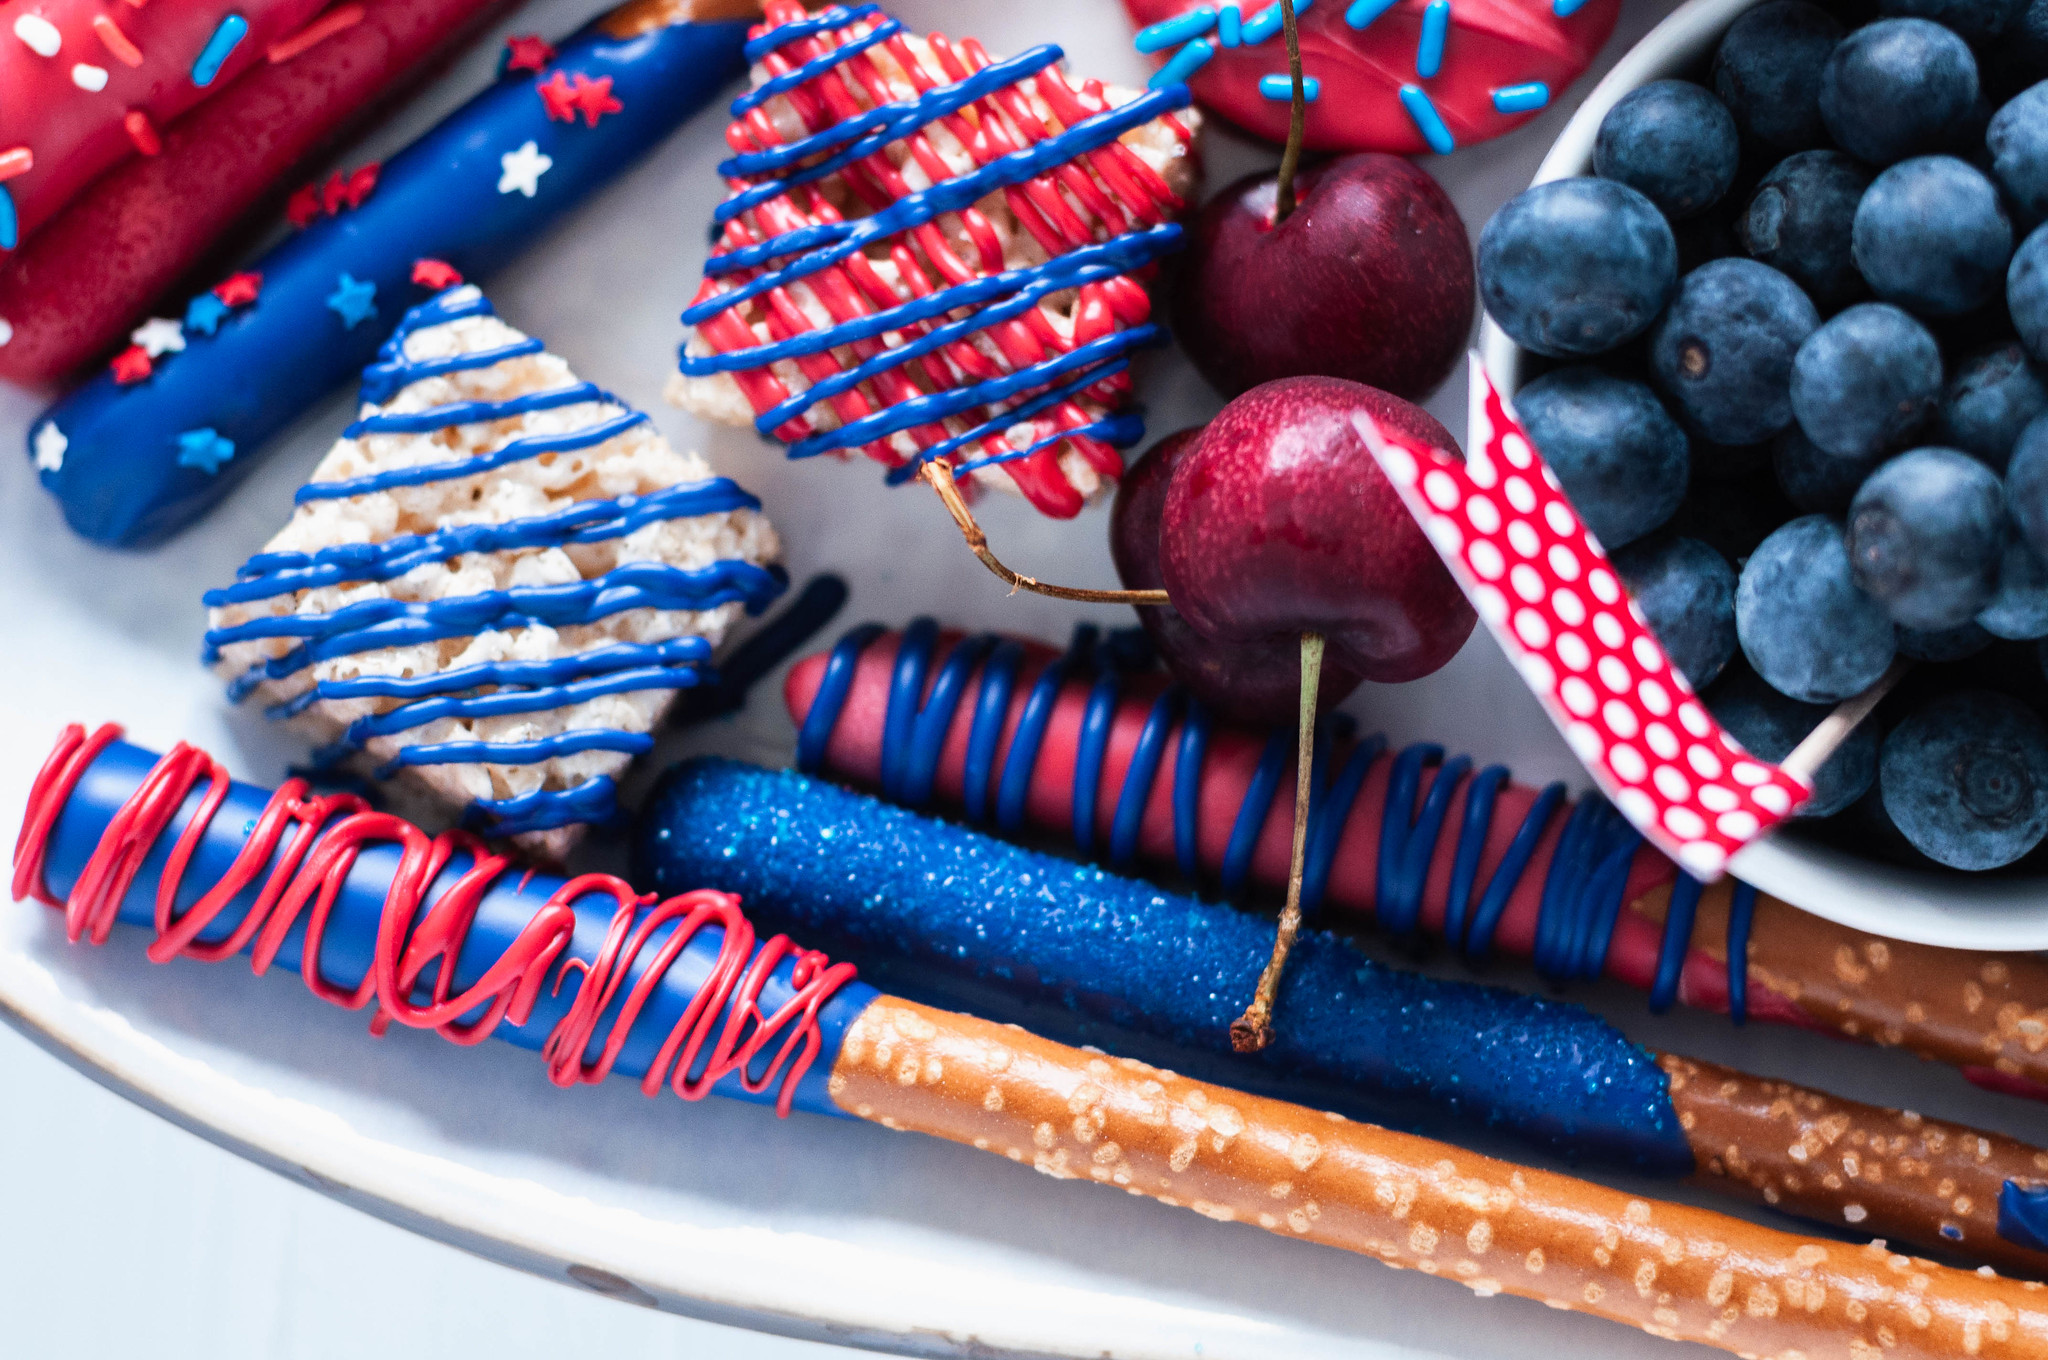 You'll be the hit of the 4th of July party when you show up with this Red White and Blue Dessert Board. Super simple to make with store-bought ingredients, some time and all your creative juices.